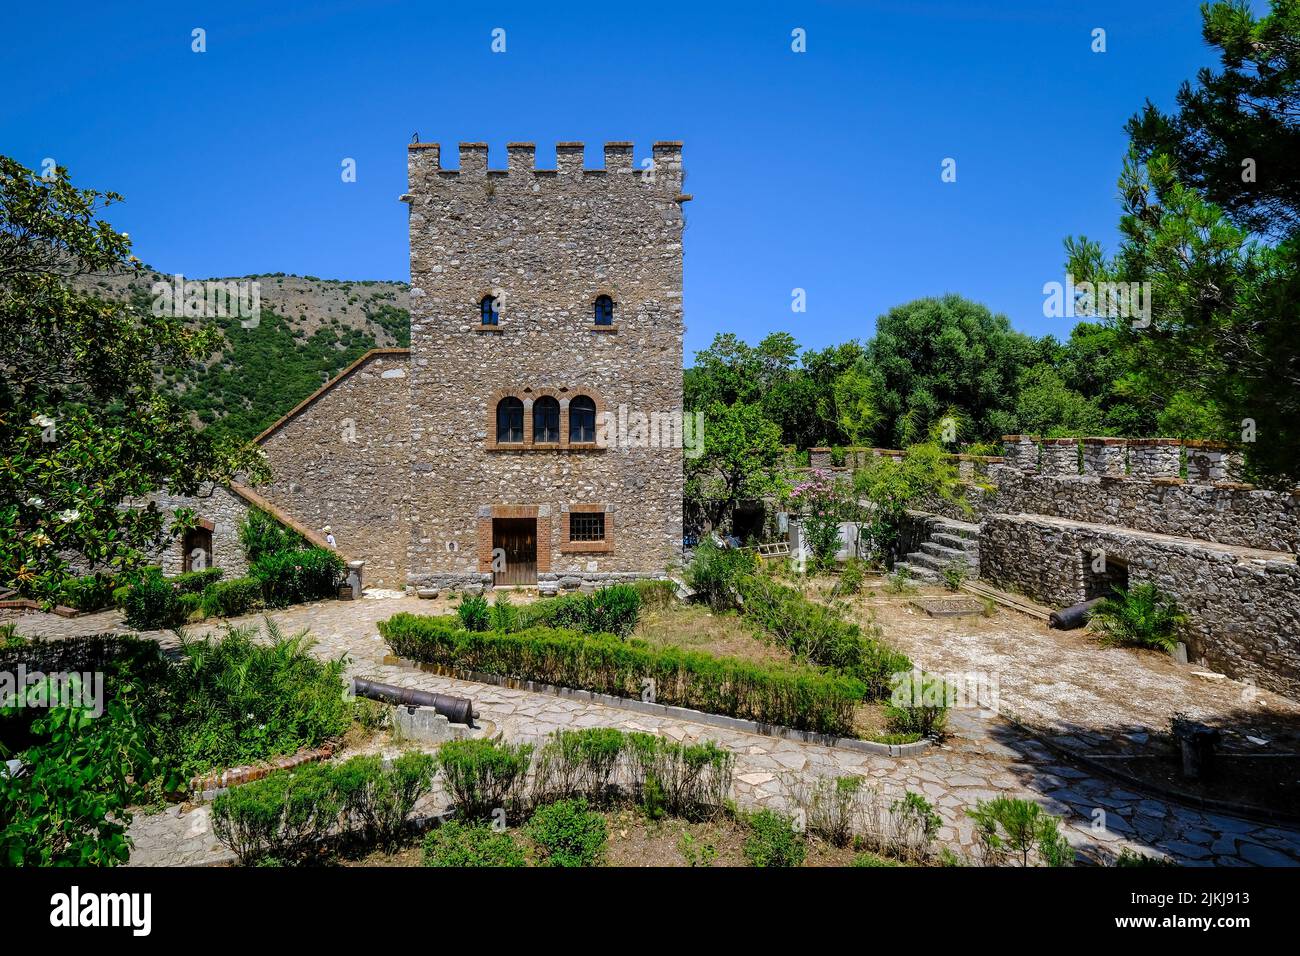 Butrint, Ksamil, Albania - The Venetian castle on the acropolis in ancient Butrint, World Heritage ruined city of Butrint. Stock Photo